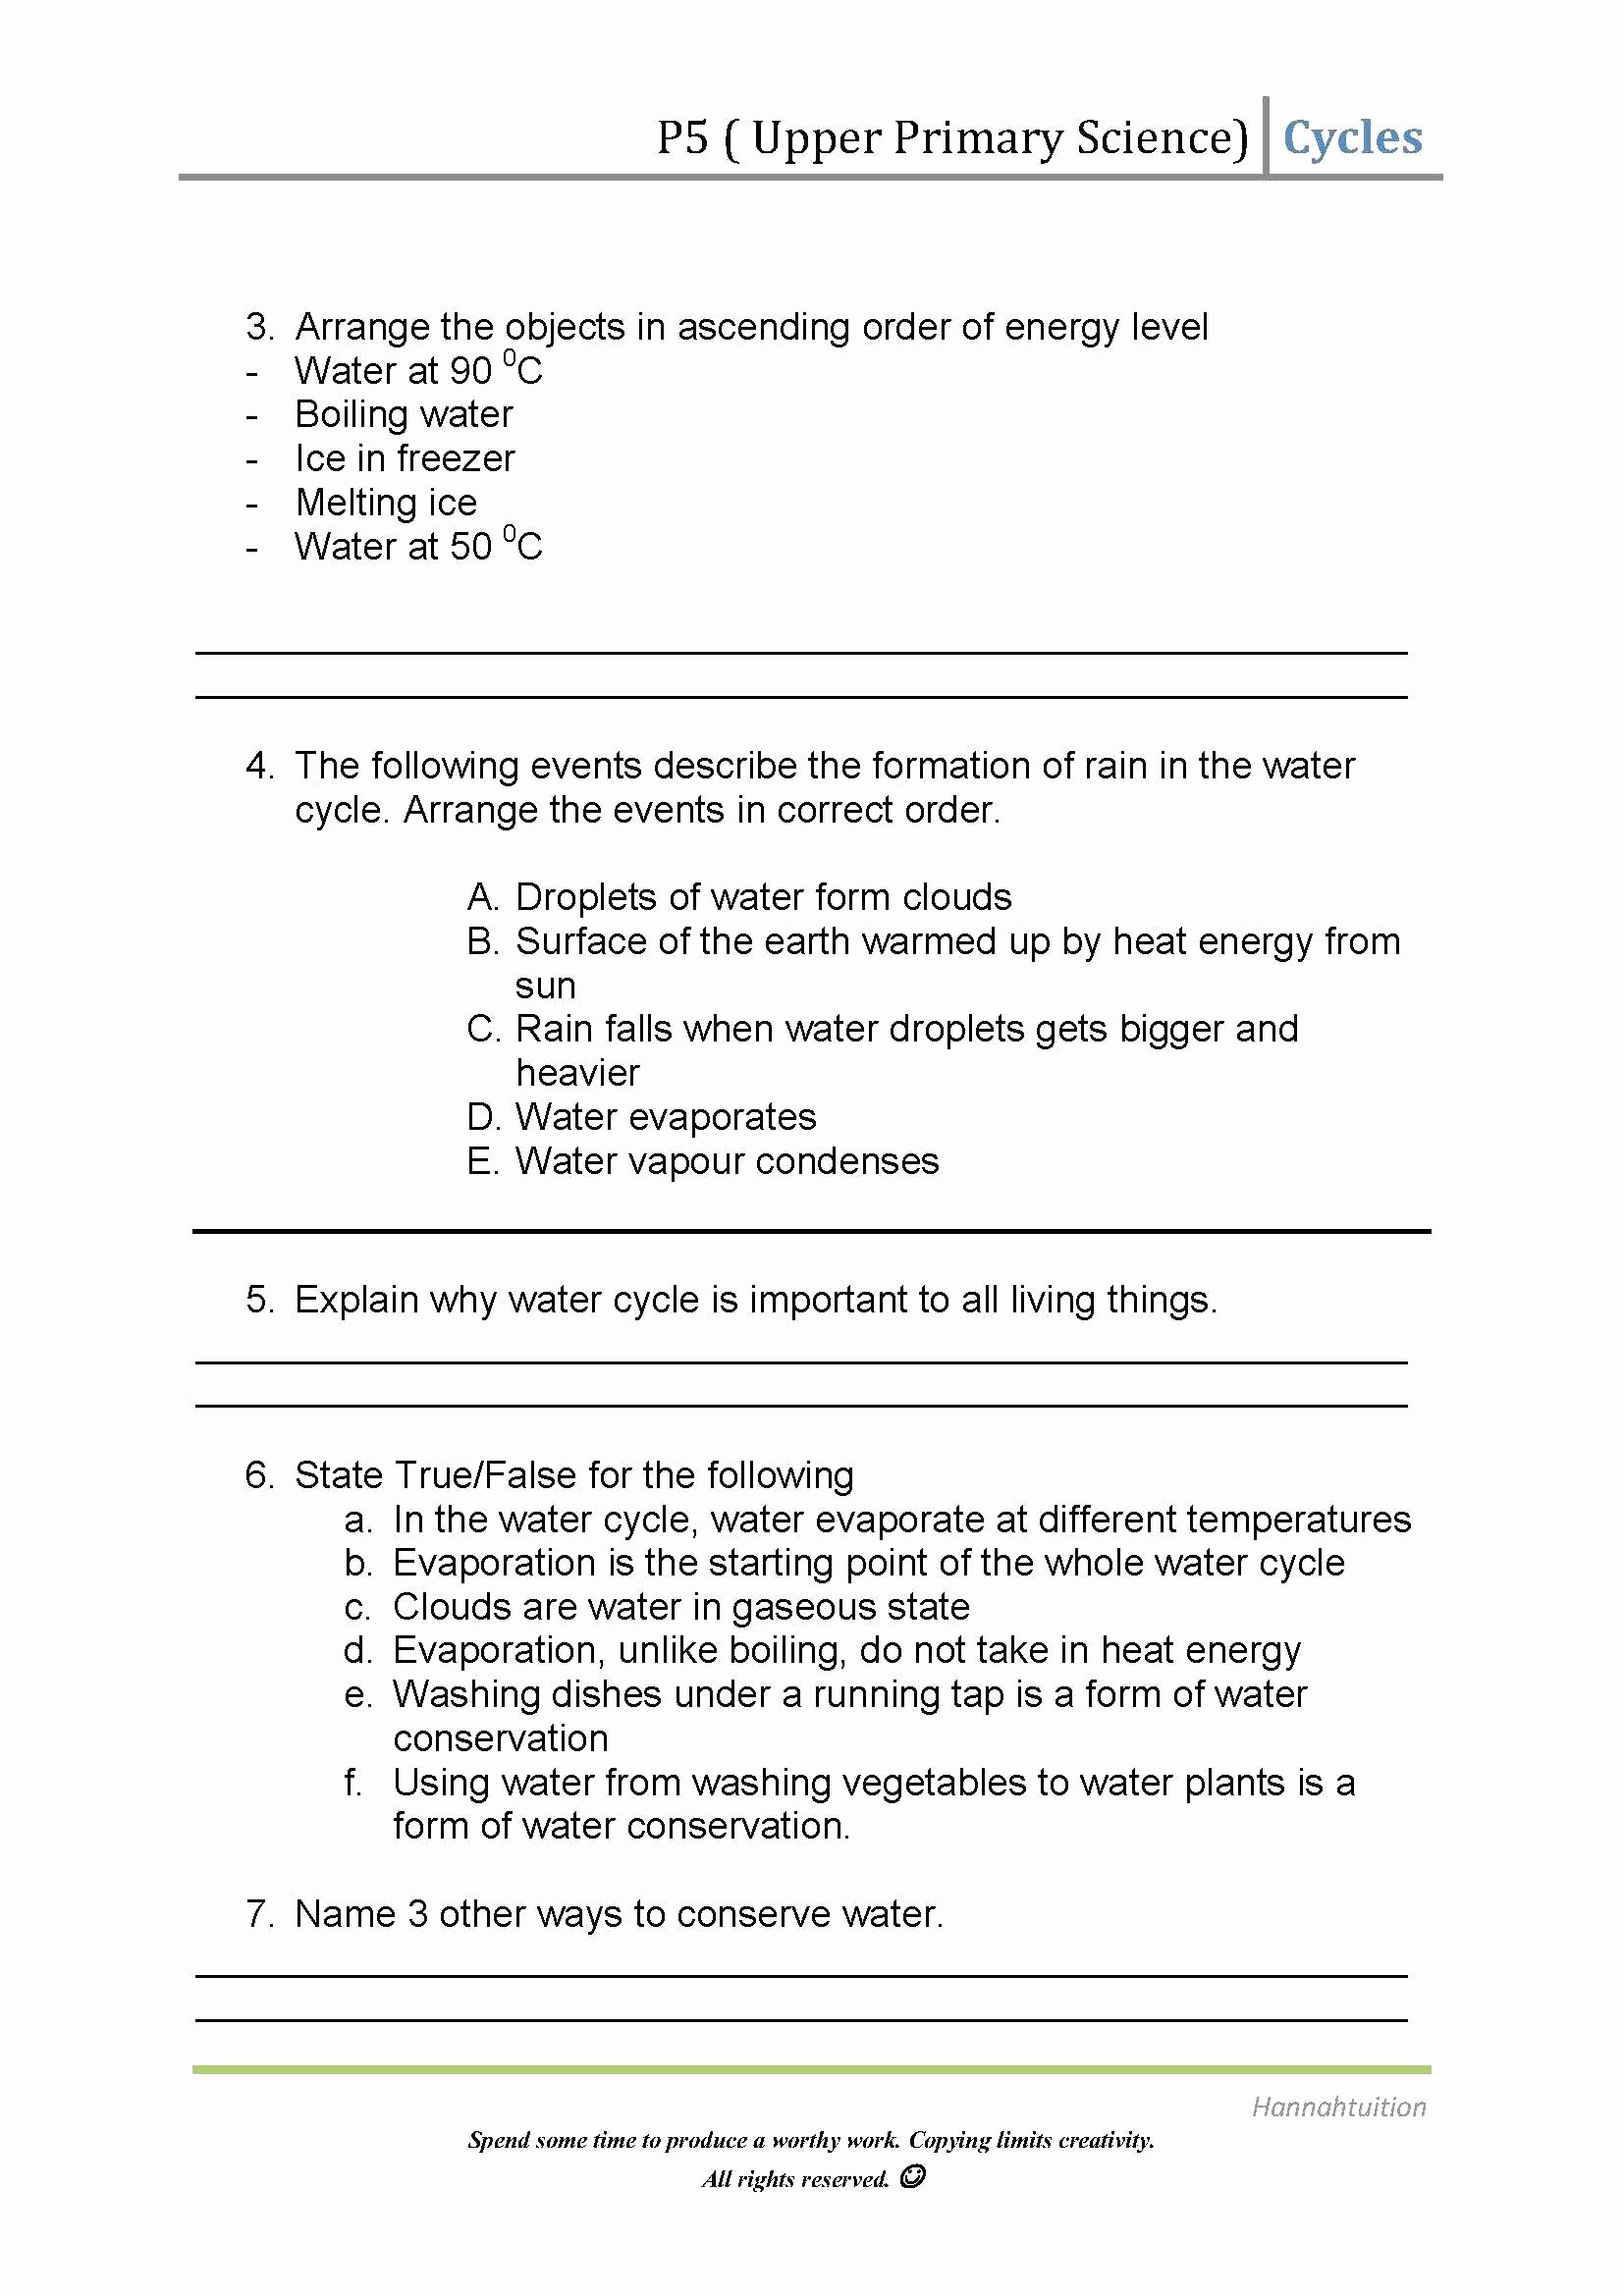 Water Cycle Worksheet Answer Key Awesome Water Cycle Worksheet Answer Key the Best Worksheets Image